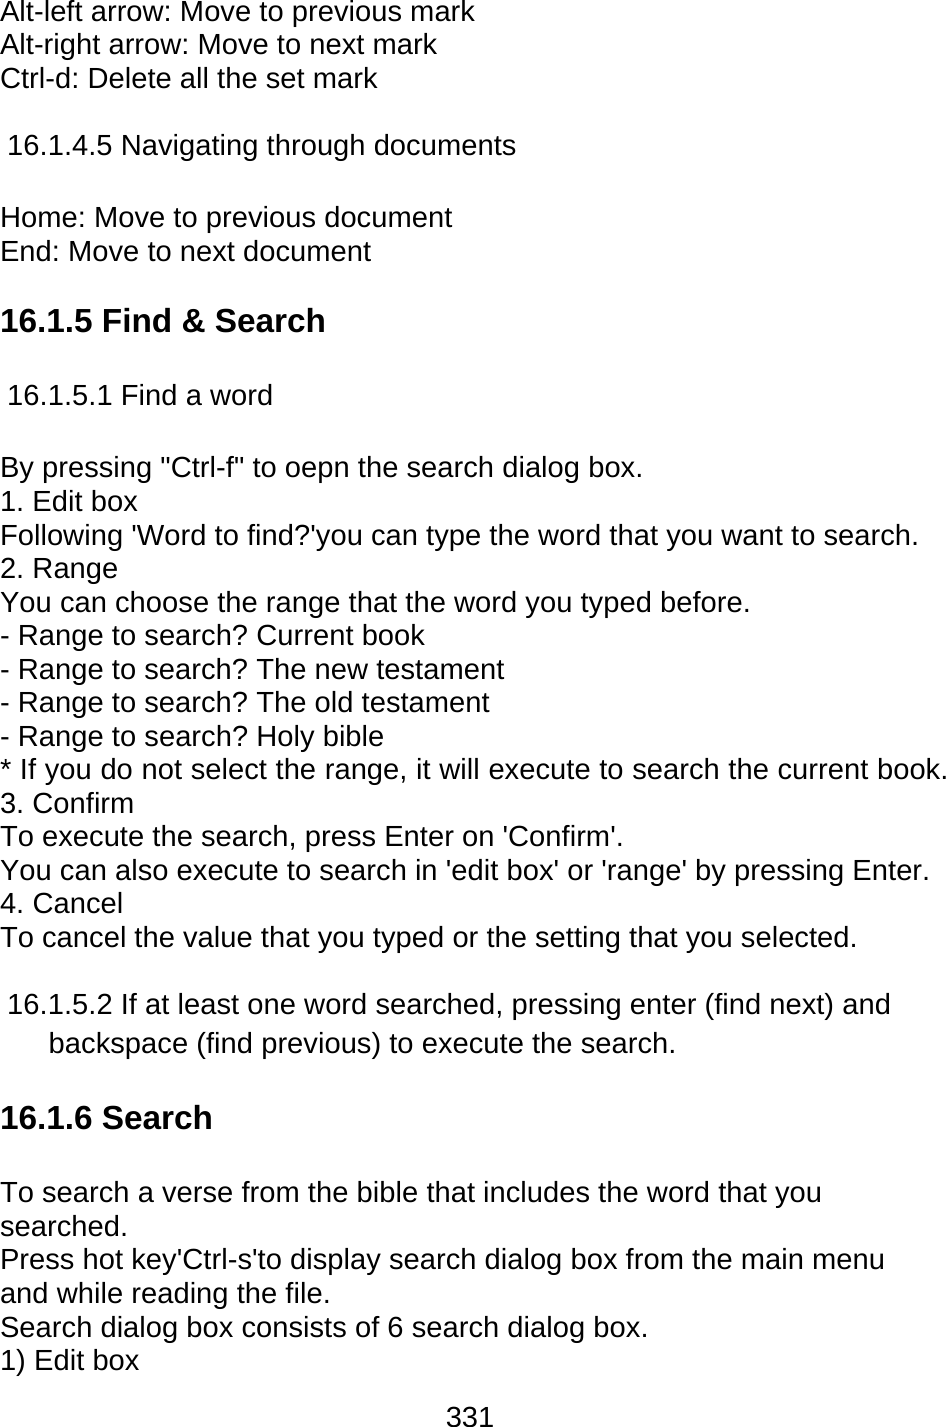 331  Alt-left arrow: Move to previous mark Alt-right arrow: Move to next mark Ctrl-d: Delete all the set mark  16.1.4.5 Navigating through documents  Home: Move to previous document   End: Move to next document    16.1.5 Find &amp; Search  16.1.5.1 Find a word  By pressing &quot;Ctrl-f&quot; to oepn the search dialog box. 1. Edit box Following &apos;Word to find?&apos;you can type the word that you want to search. 2. Range   You can choose the range that the word you typed before. - Range to search? Current book - Range to search? The new testament - Range to search? The old testament - Range to search? Holy bible * If you do not select the range, it will execute to search the current book. 3. Confirm To execute the search, press Enter on &apos;Confirm&apos;. You can also execute to search in &apos;edit box&apos; or &apos;range&apos; by pressing Enter. 4. Cancel   To cancel the value that you typed or the setting that you selected.  16.1.5.2 If at least one word searched, pressing enter (find next) and backspace (find previous) to execute the search.  16.1.6 Search  To search a verse from the bible that includes the word that you searched. Press hot key&apos;Ctrl-s&apos;to display search dialog box from the main menu and while reading the file. Search dialog box consists of 6 search dialog box. 1) Edit box 